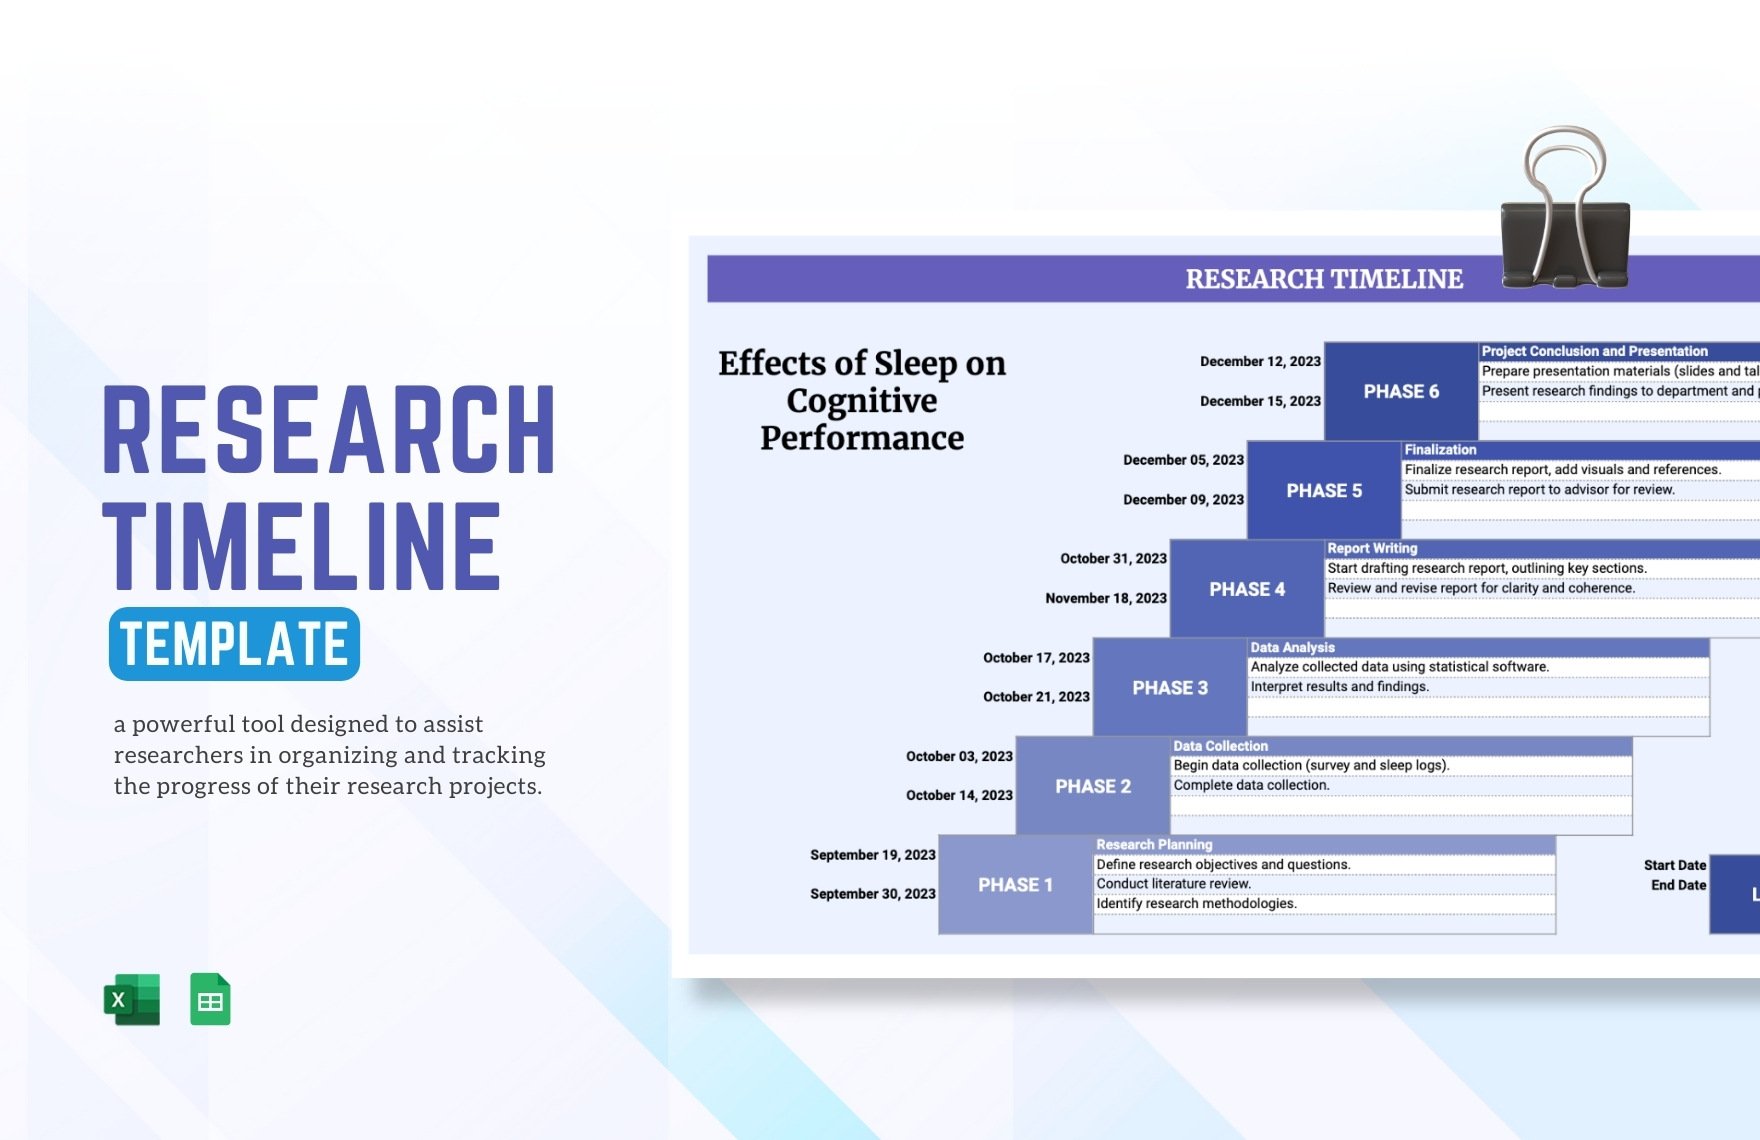 Research Timeline Template in Excel, Google Sheets